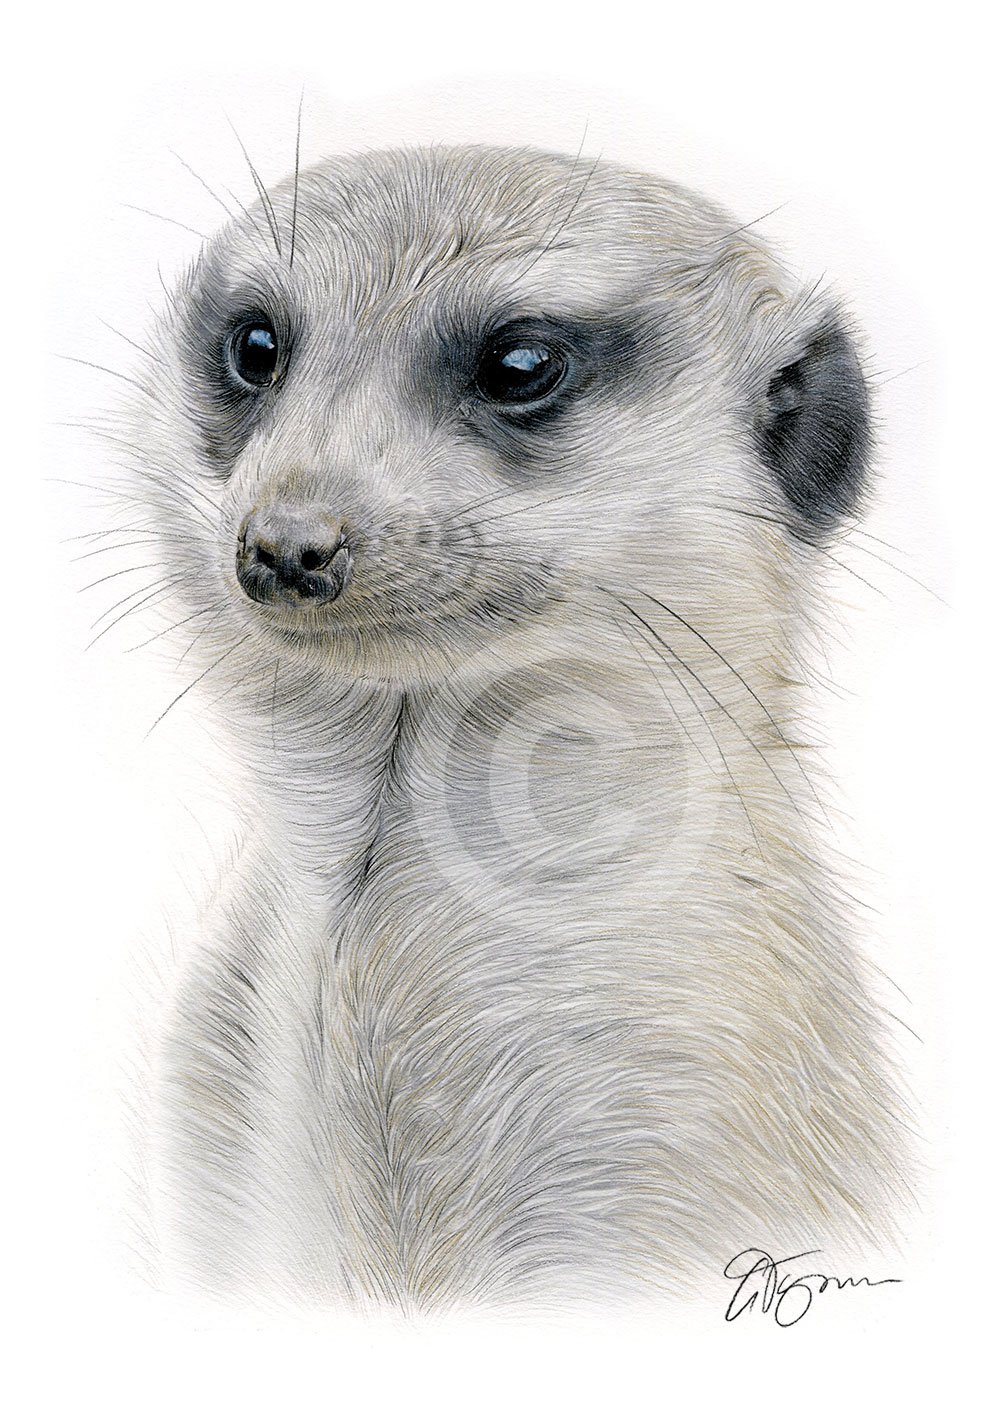 Colour pencil drawing of a meerkat by artist Gary Tymon